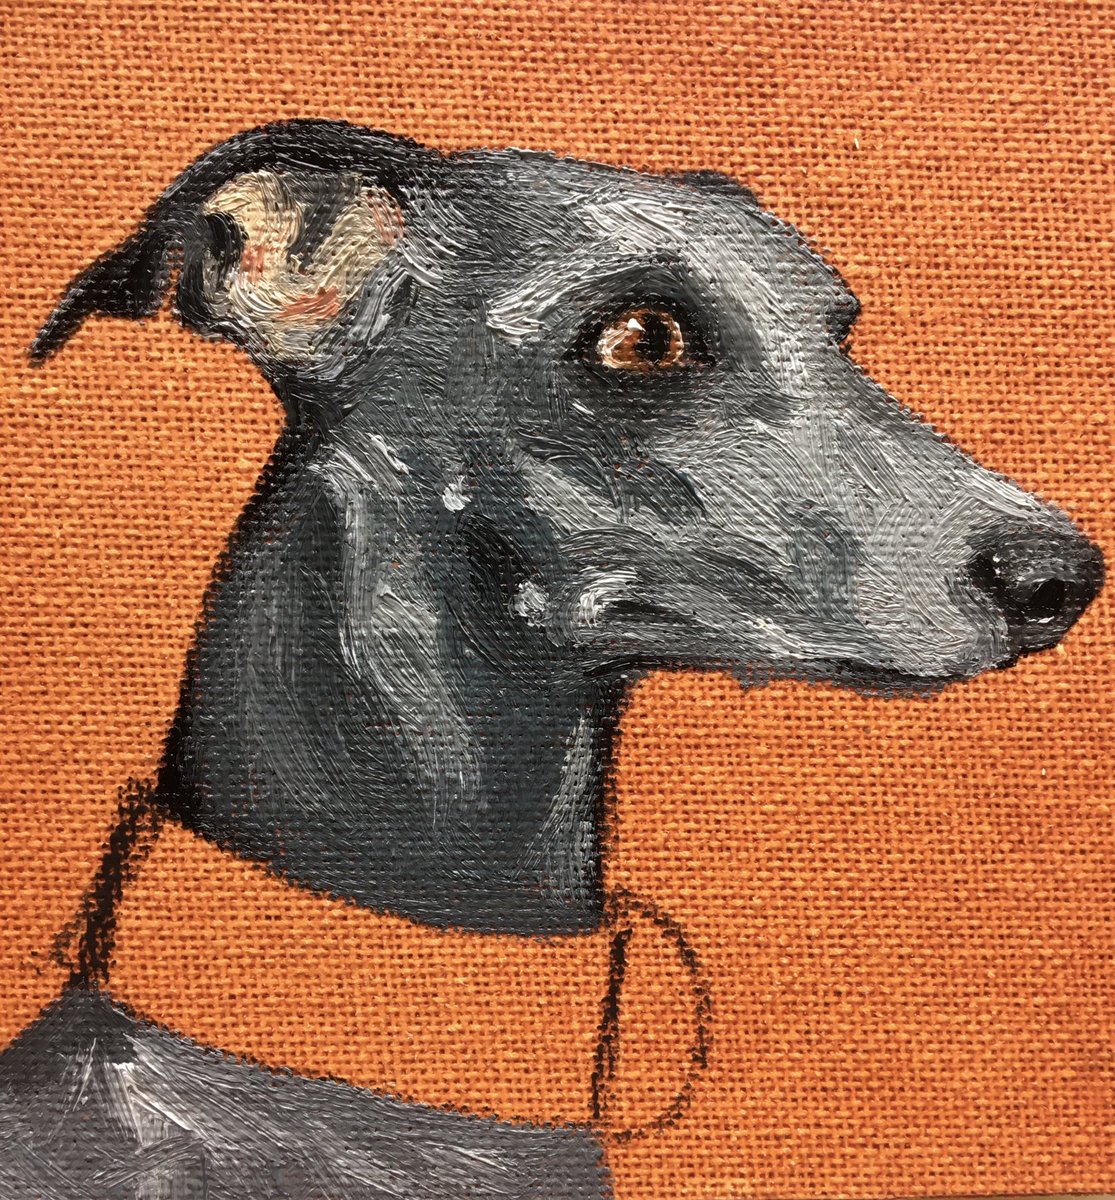 It’s going to take a strong lead to hold this one back...
#WorkInProgress
#DogsWithCharacter #LockdownDogs #Greyhound